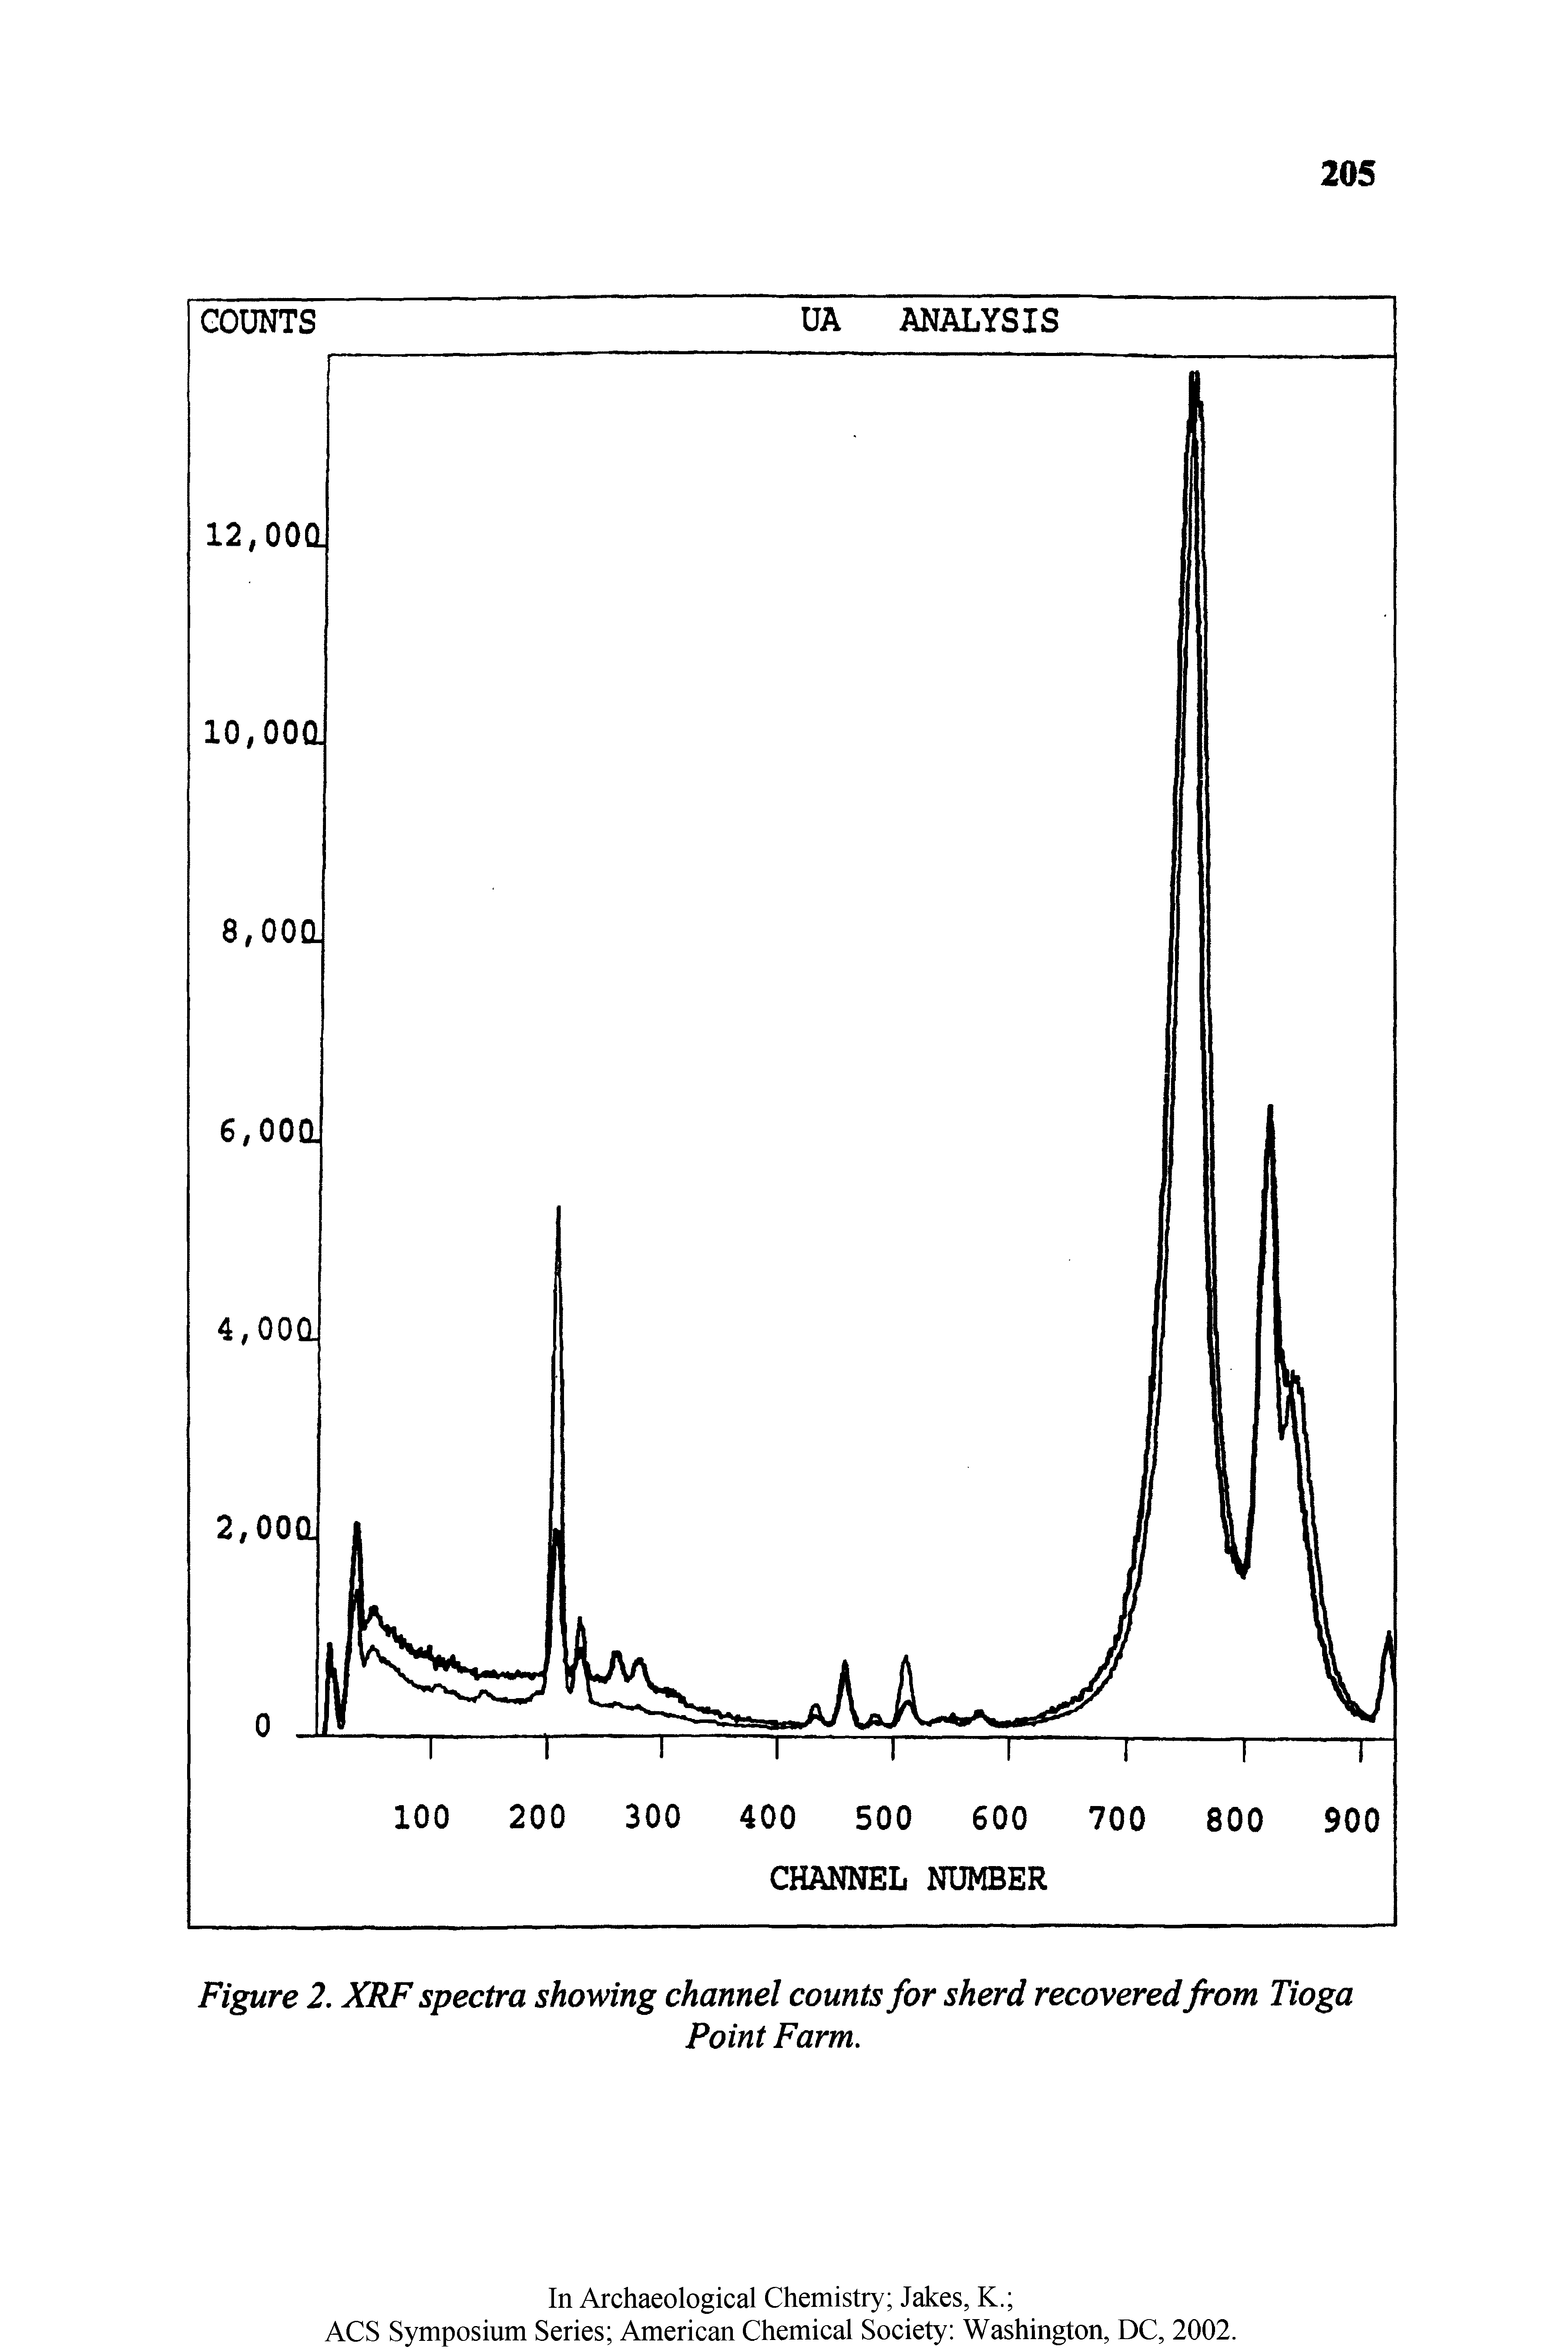 Figure 2. XRF spectra showing channel counts for sherd recoveredfrom Tioga...